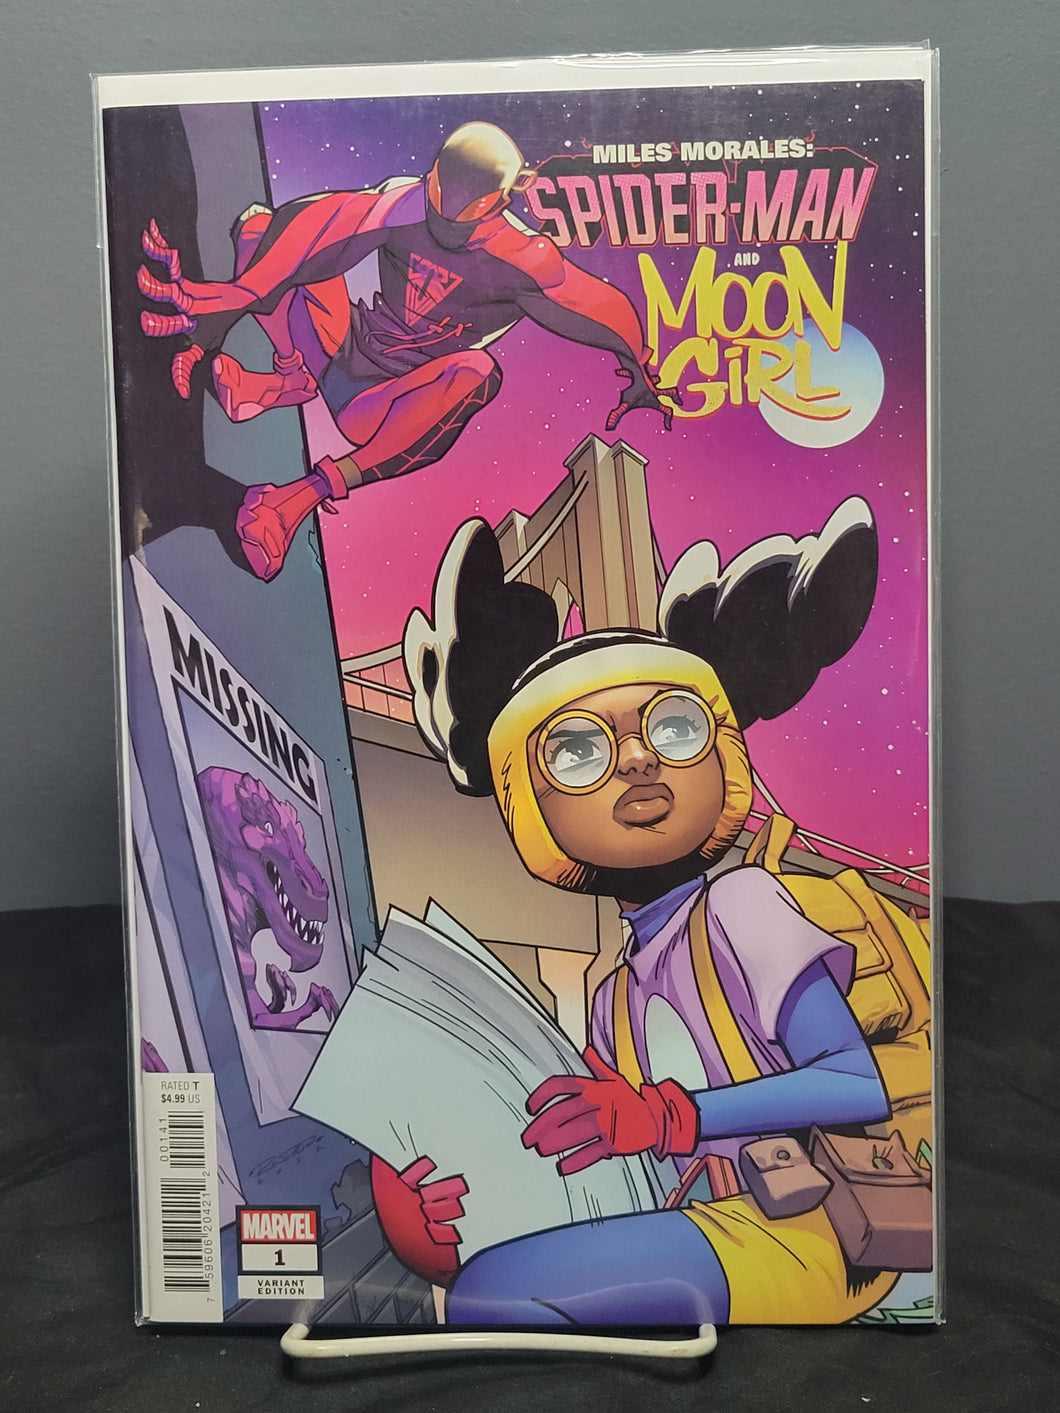 Miles Morales Spider-Man And Moon Girl #1 1:25 Variant